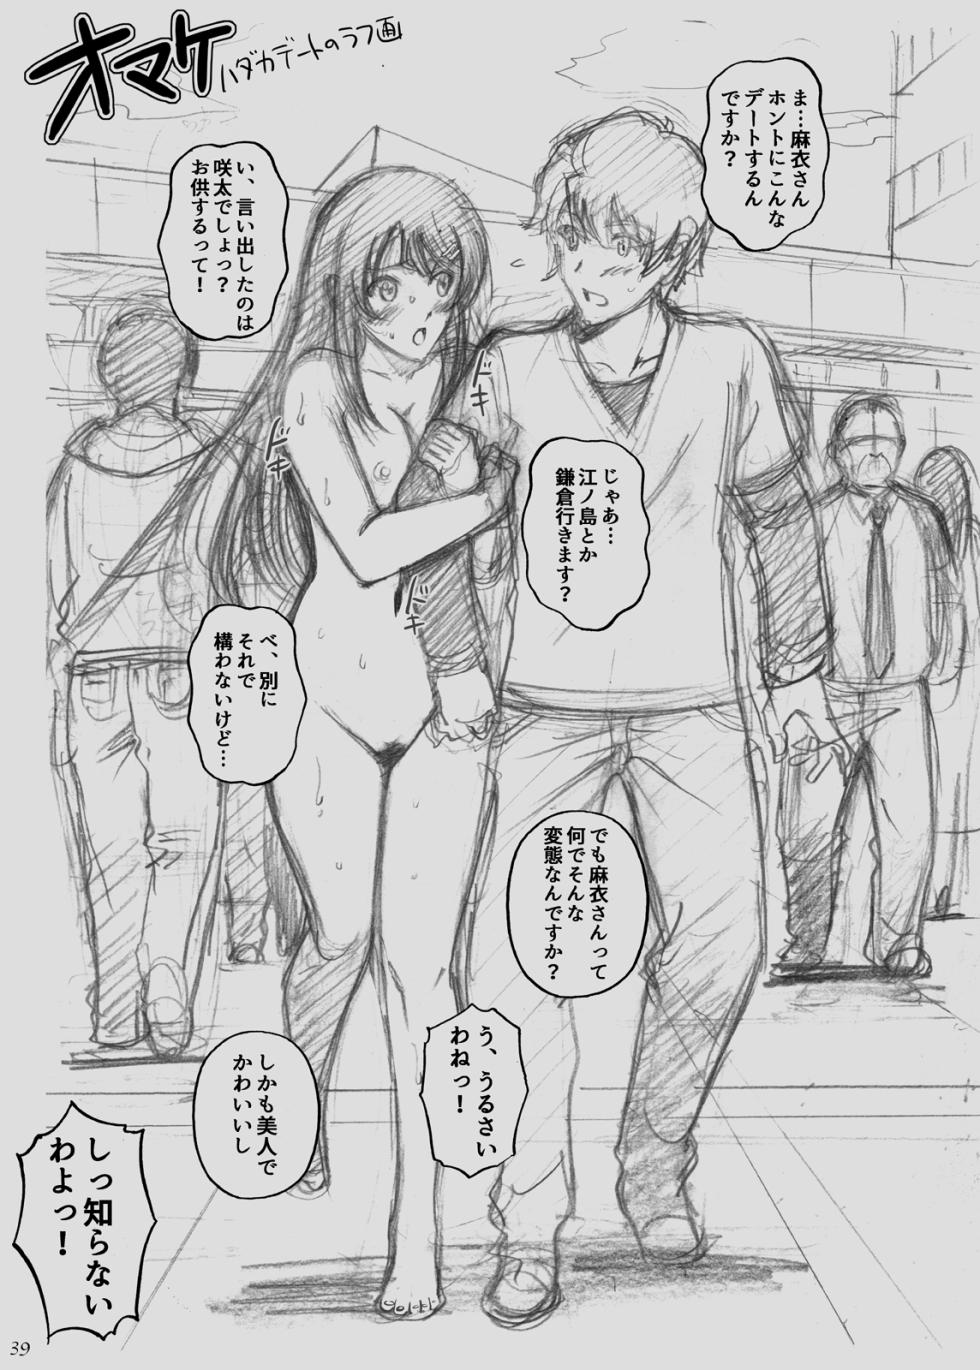 [ACTIVA (SMAC)] Youth Bunny Senpai Doesn't Dream of Wandering Naked - Page 39